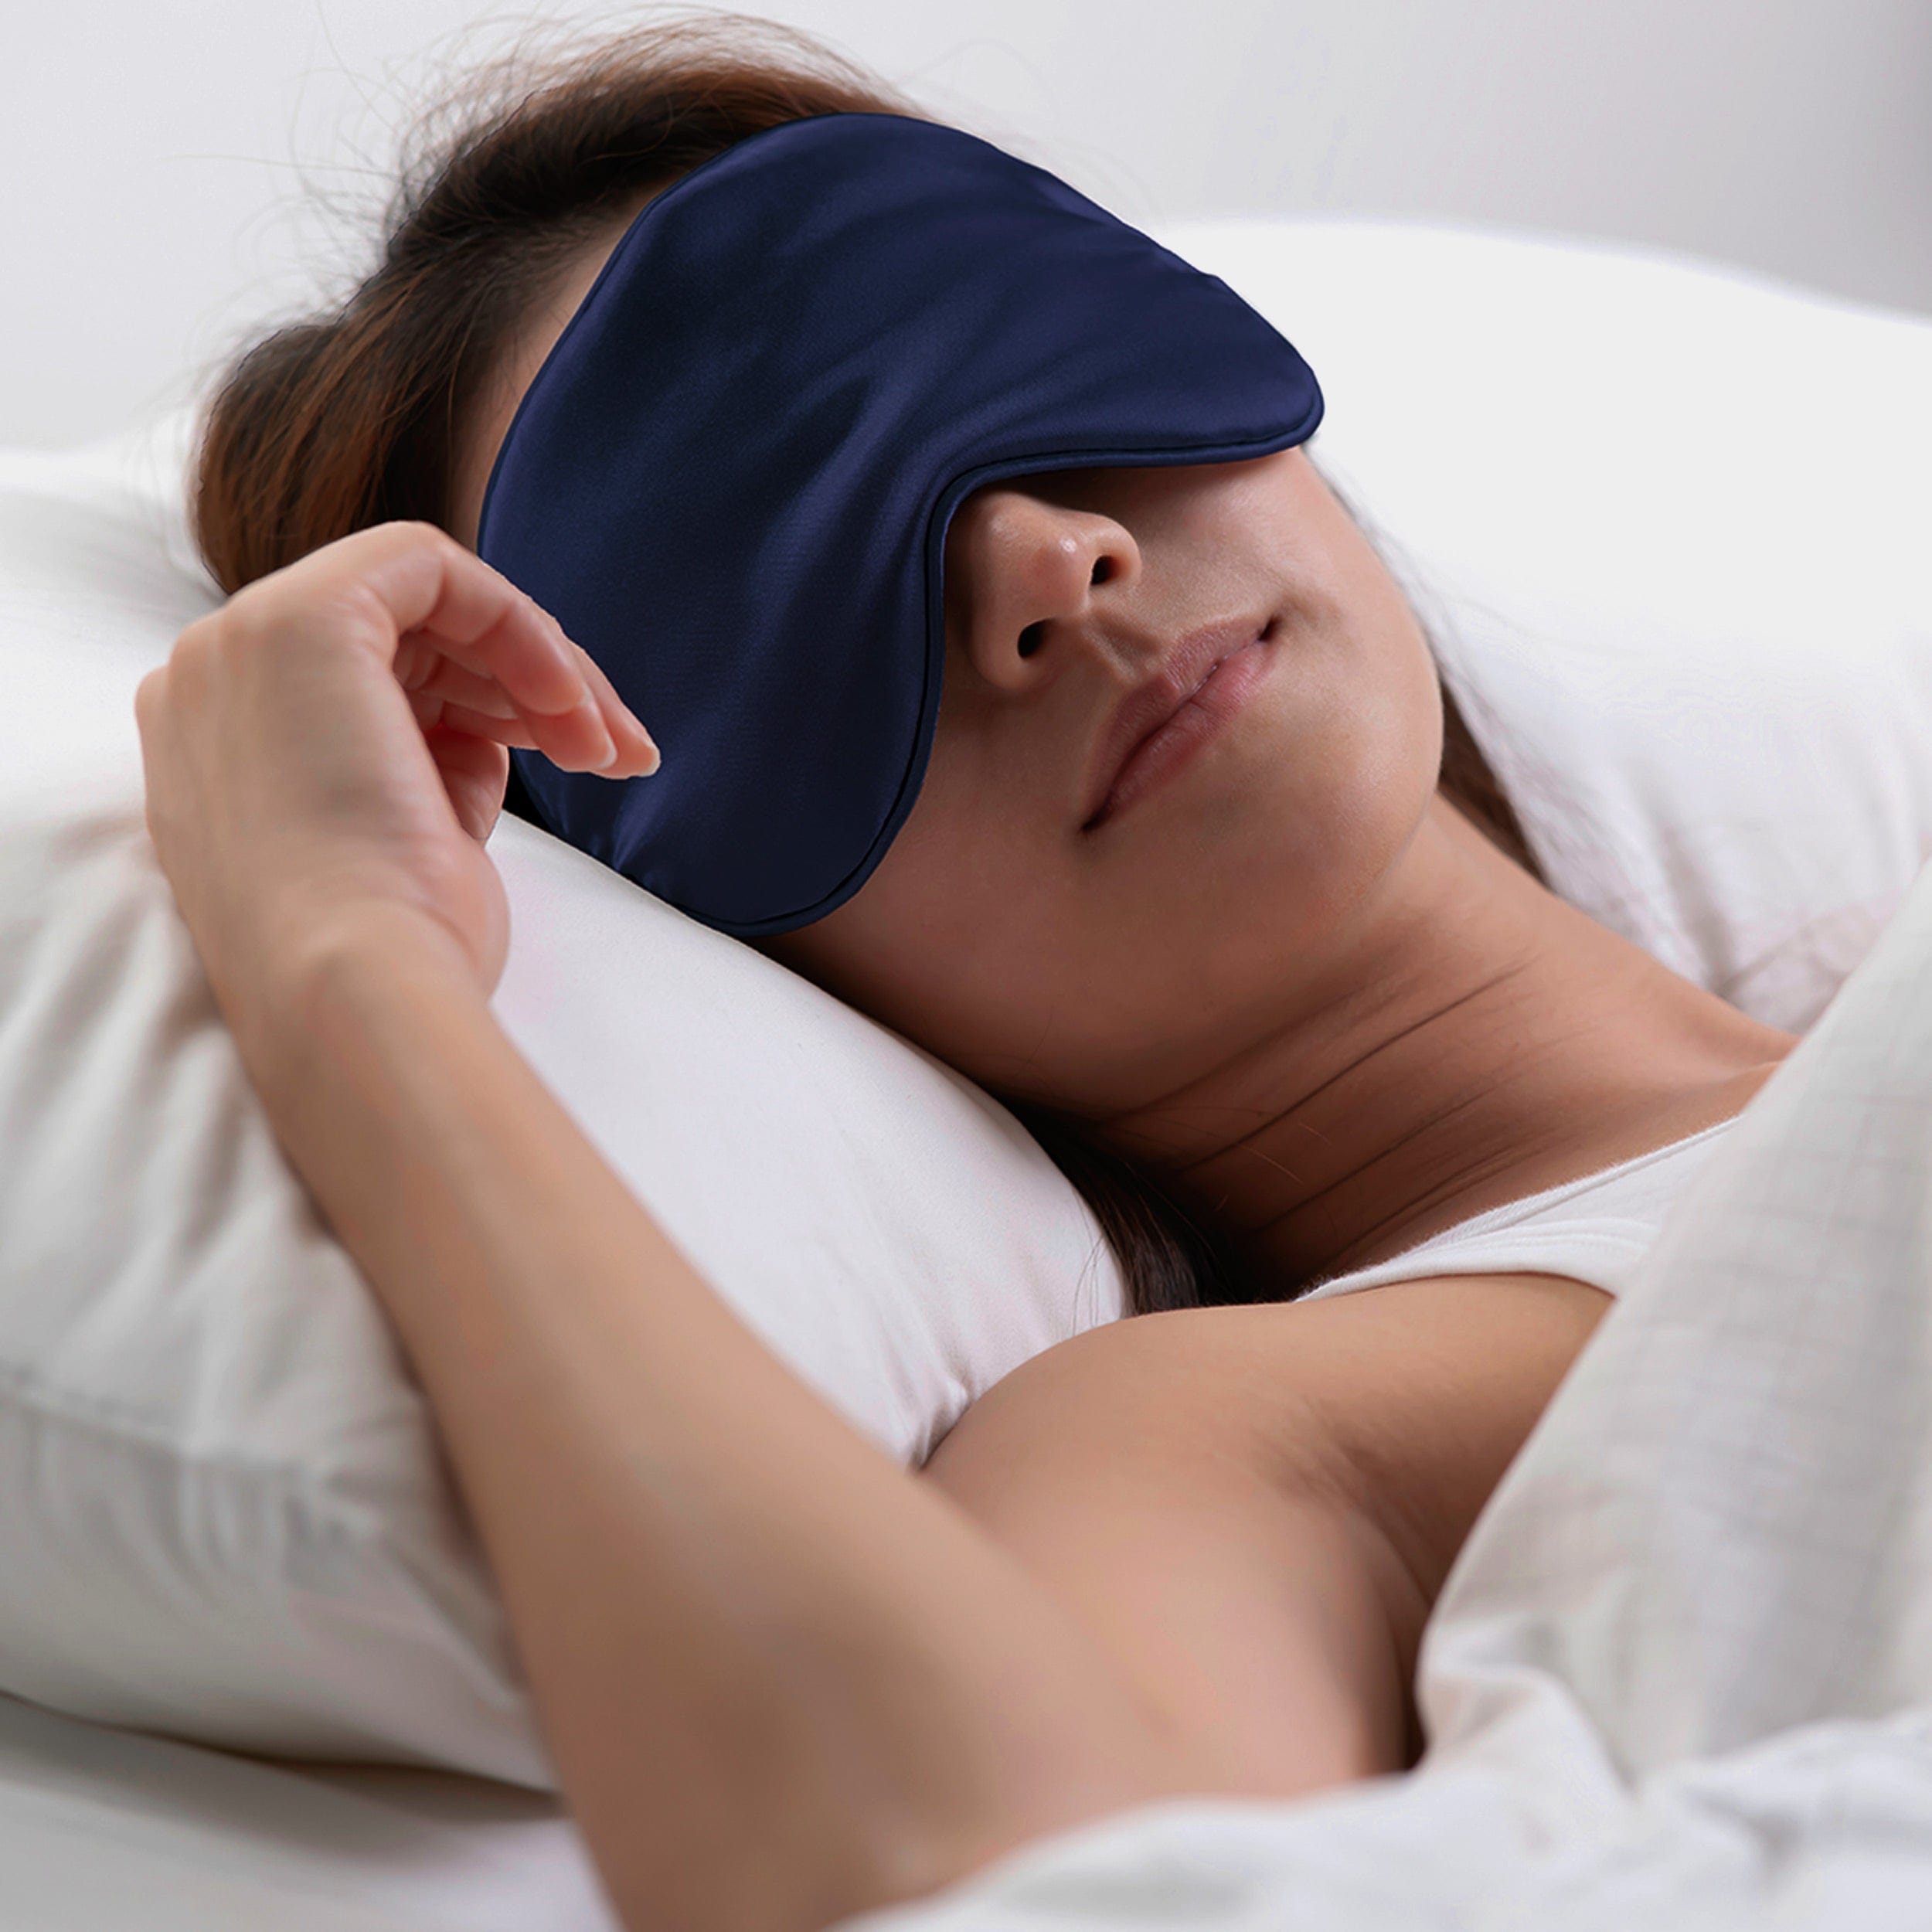 Woman model wearing the 100% silk eye mask, pictured in bed getting a restful sleep.